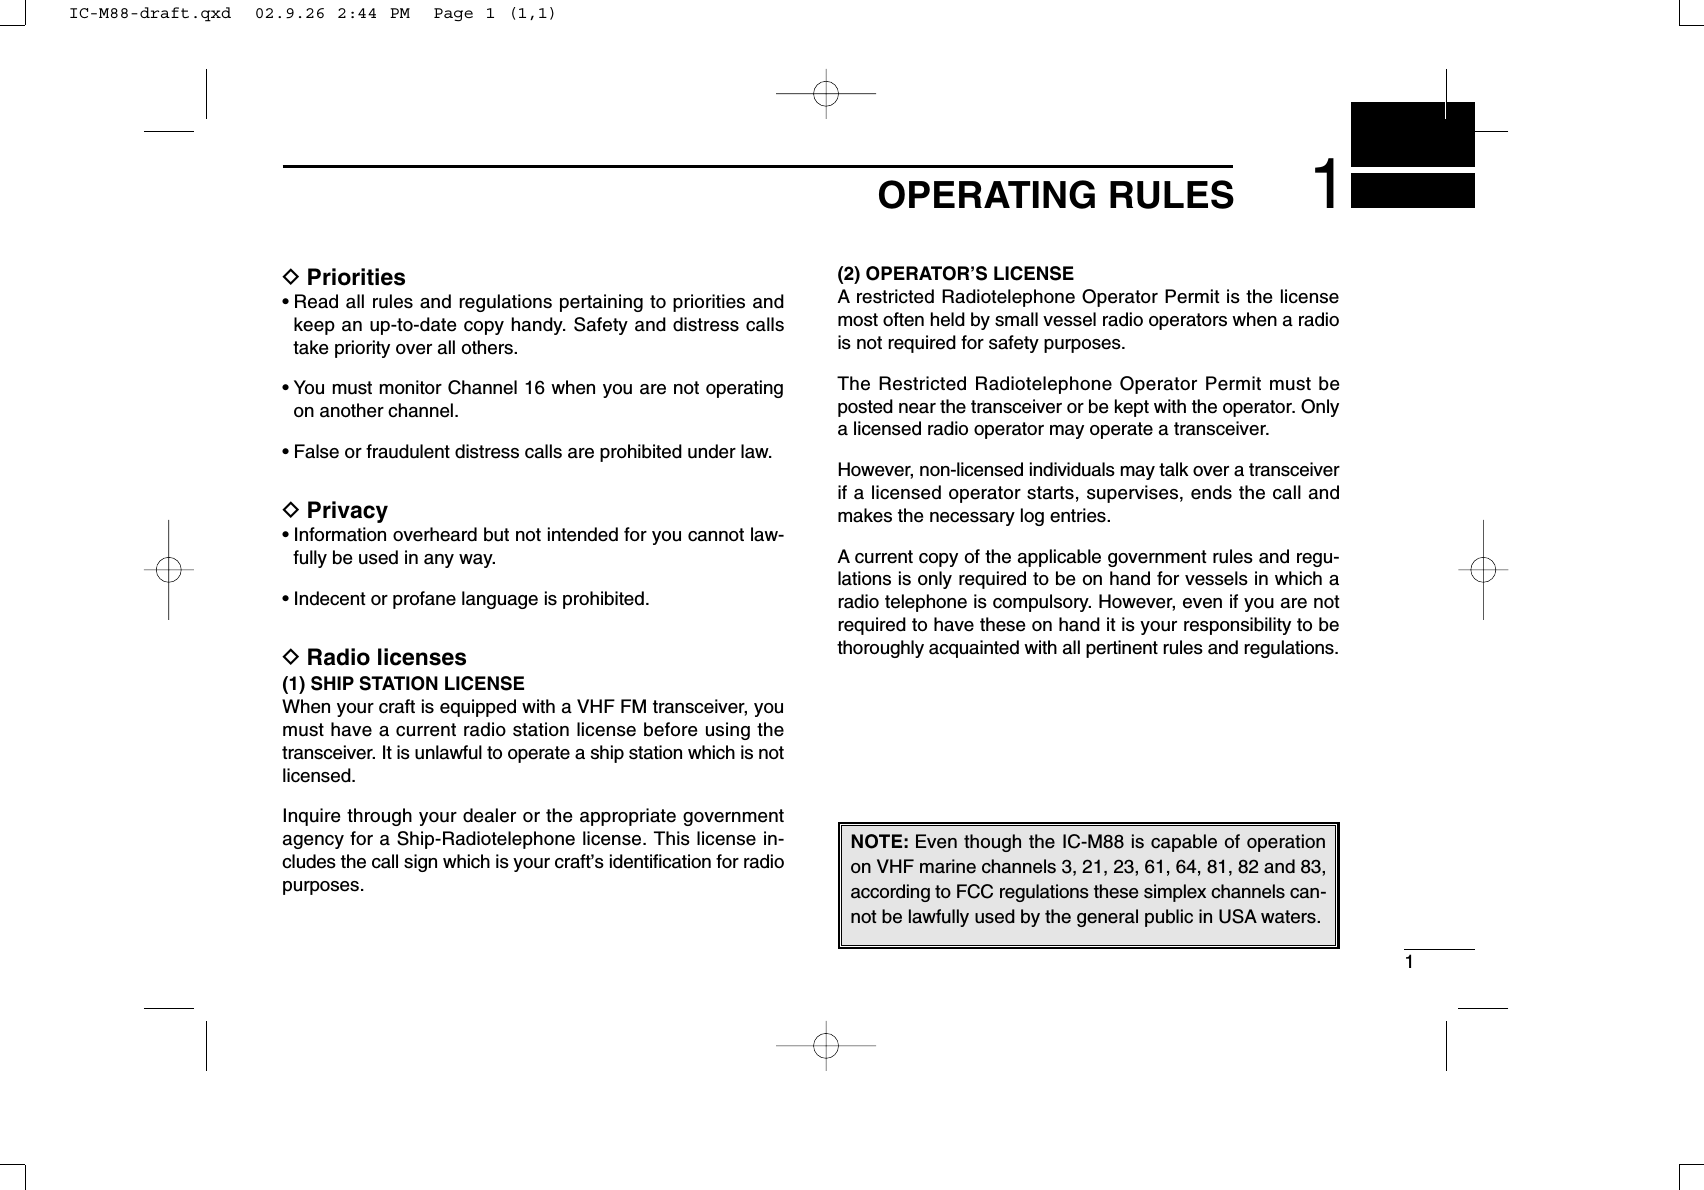 11OPERATING RULESDPriorities• Read all rules and regulations pertaining to priorities andkeep an up-to-date copy handy. Safety and distress callstake priority over all others.• You must monitor Channel 16 when you are not operatingon another channel.• False or fraudulent distress calls are prohibited under law.DPrivacy• Information overheard but not intended for you cannot law-fully be used in any way.• Indecent or profane language is prohibited.DRadio licenses(1) SHIP STATION LICENSEWhen your craft is equipped with a VHF FM transceiver, youmust have a current radio station license before using thetransceiver. It is unlawful to operate a ship station which is notlicensed.Inquire through your dealer or the appropriate governmentagency for a Ship-Radiotelephone license. This license in-cludes the call sign which is your craft’s identiﬁcation for radiopurposes.(2) OPERATOR’S LICENSEA restricted Radiotelephone Operator Permit is the licensemost often held by small vessel radio operators when a radiois not required for safety purposes.The Restricted Radiotelephone Operator Permit must beposted near the transceiver or be kept with the operator. Onlya licensed radio operator may operate a transceiver.However, non-licensed individuals may talk over a transceiverif a licensed operator starts, supervises, ends the call andmakes the necessary log entries.A current copy of the applicable government rules and regu-lations is only required to be on hand for vessels in which aradio telephone is compulsory. However, even if you are notrequired to have these on hand it is your responsibility to bethoroughly acquainted with all pertinent rules and regulations.NOTE: Even though the IC-M88 is capable of operationon VHF marine channels 3, 21, 23, 61, 64, 81, 82 and 83,according to FCC regulations these simplex channels can-not be lawfully used by the general public in USA waters.IC-M88-draft.qxd  02.9.26 2:44 PM  Page 1 (1,1)